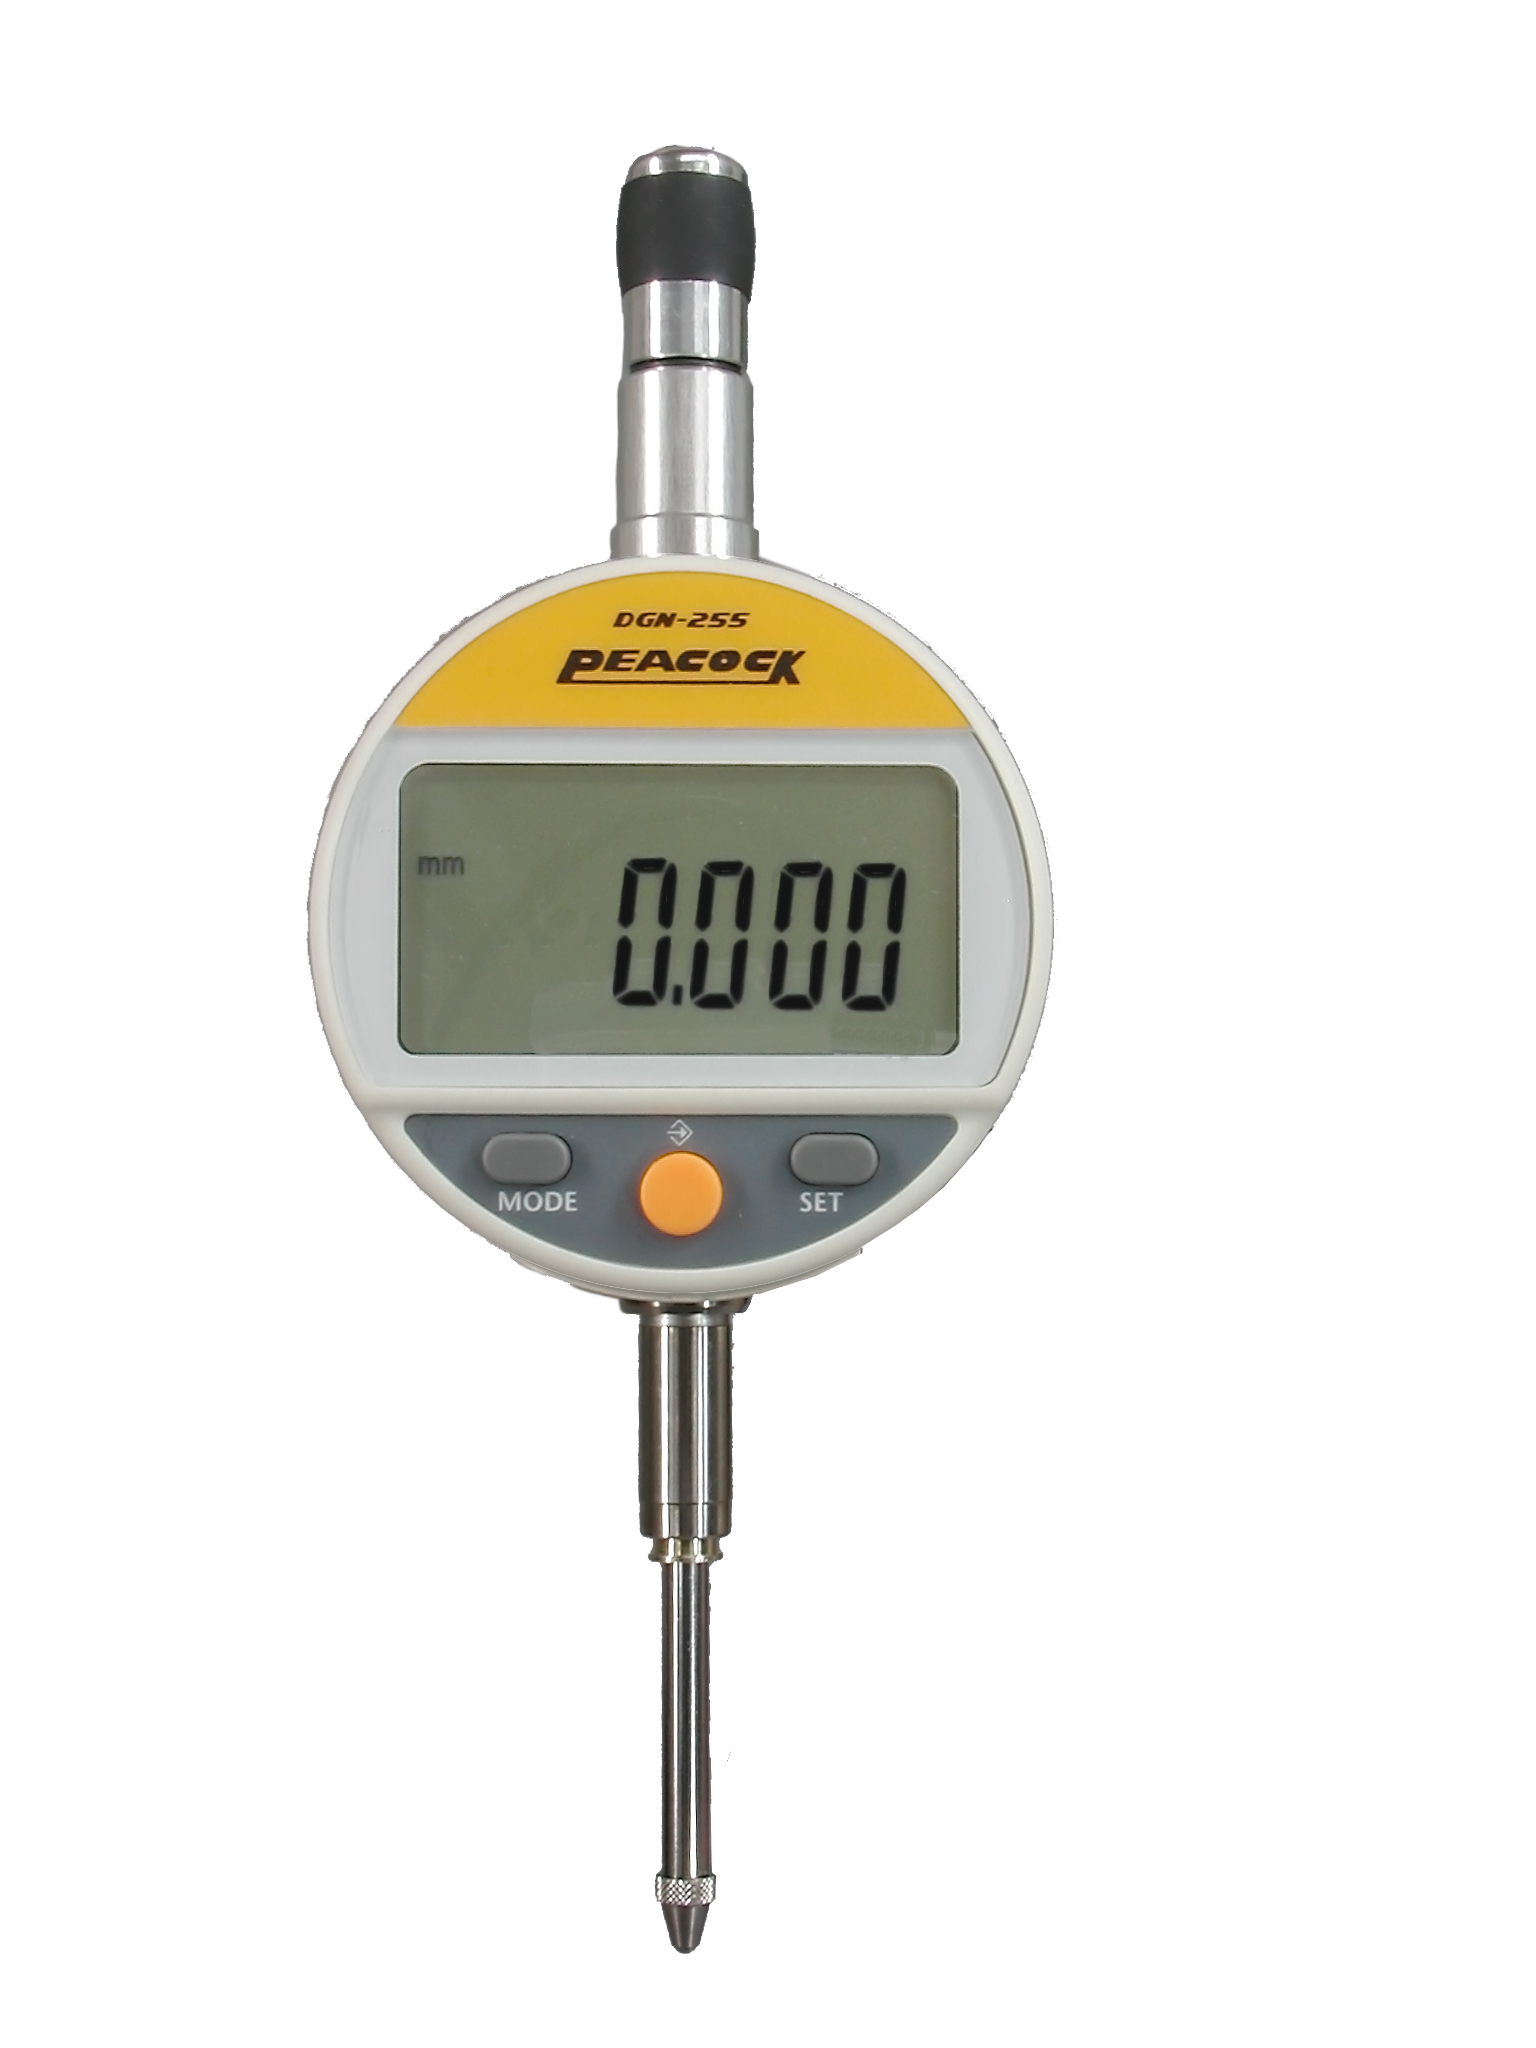 Dial Gauge - Standard Plunger Type, Digital and Integrated Display